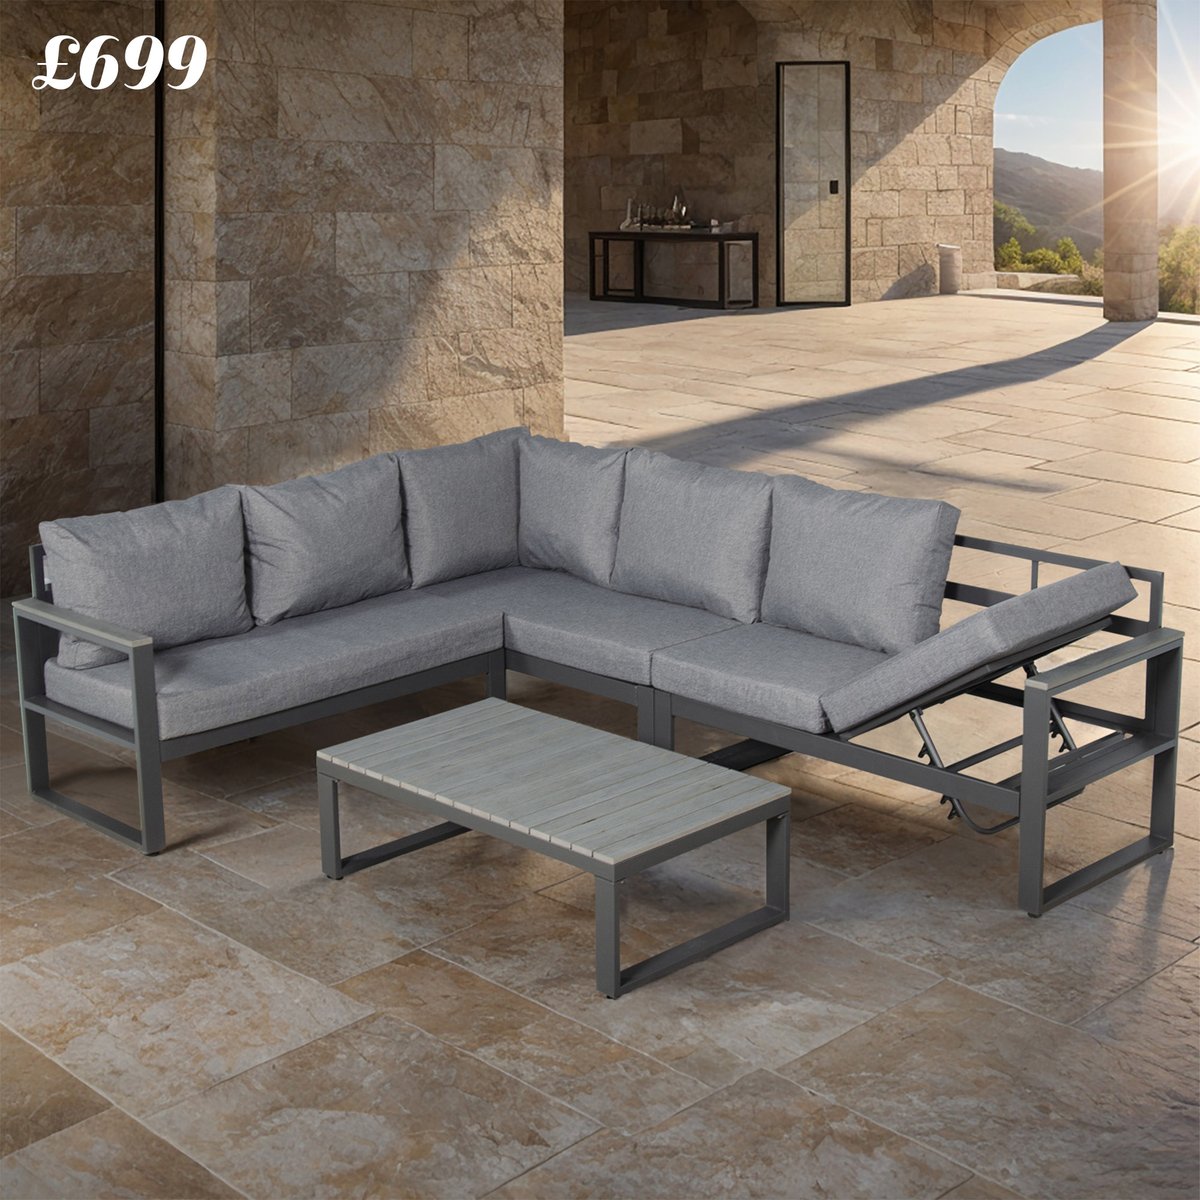 Club Rattan New Collection released for 2024 Summer
Dune Range in Full Aluminum Frame

💥PRE ORDER for End May Dispatch💥
clubrattan.co.uk/collections/al…

#GardenFurniture #OutdoorLiving #GardenTransformation #outdoor #BigSale #gardenfurnitureuk #outdoordesign #cushioncoversets #rattan